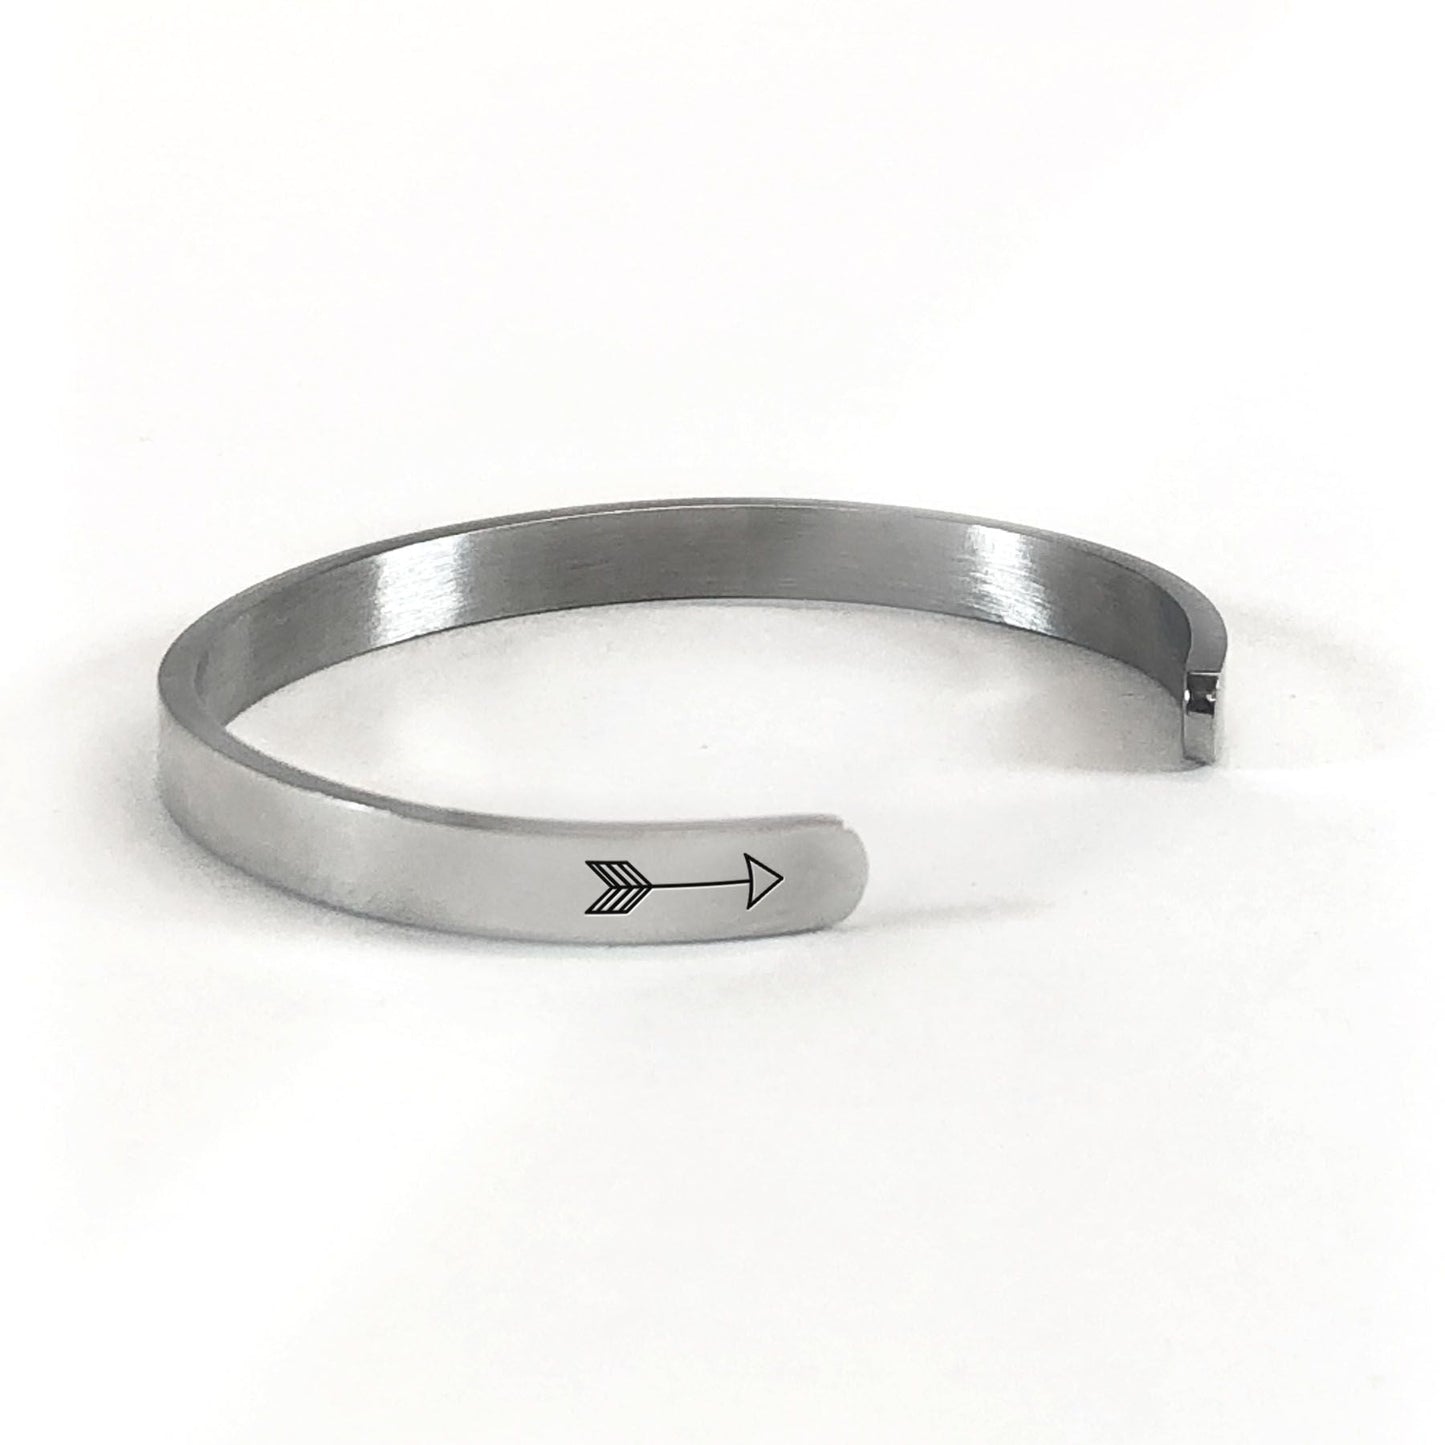 Ohana bracelet in silver rotated to show arrows and cuff opening